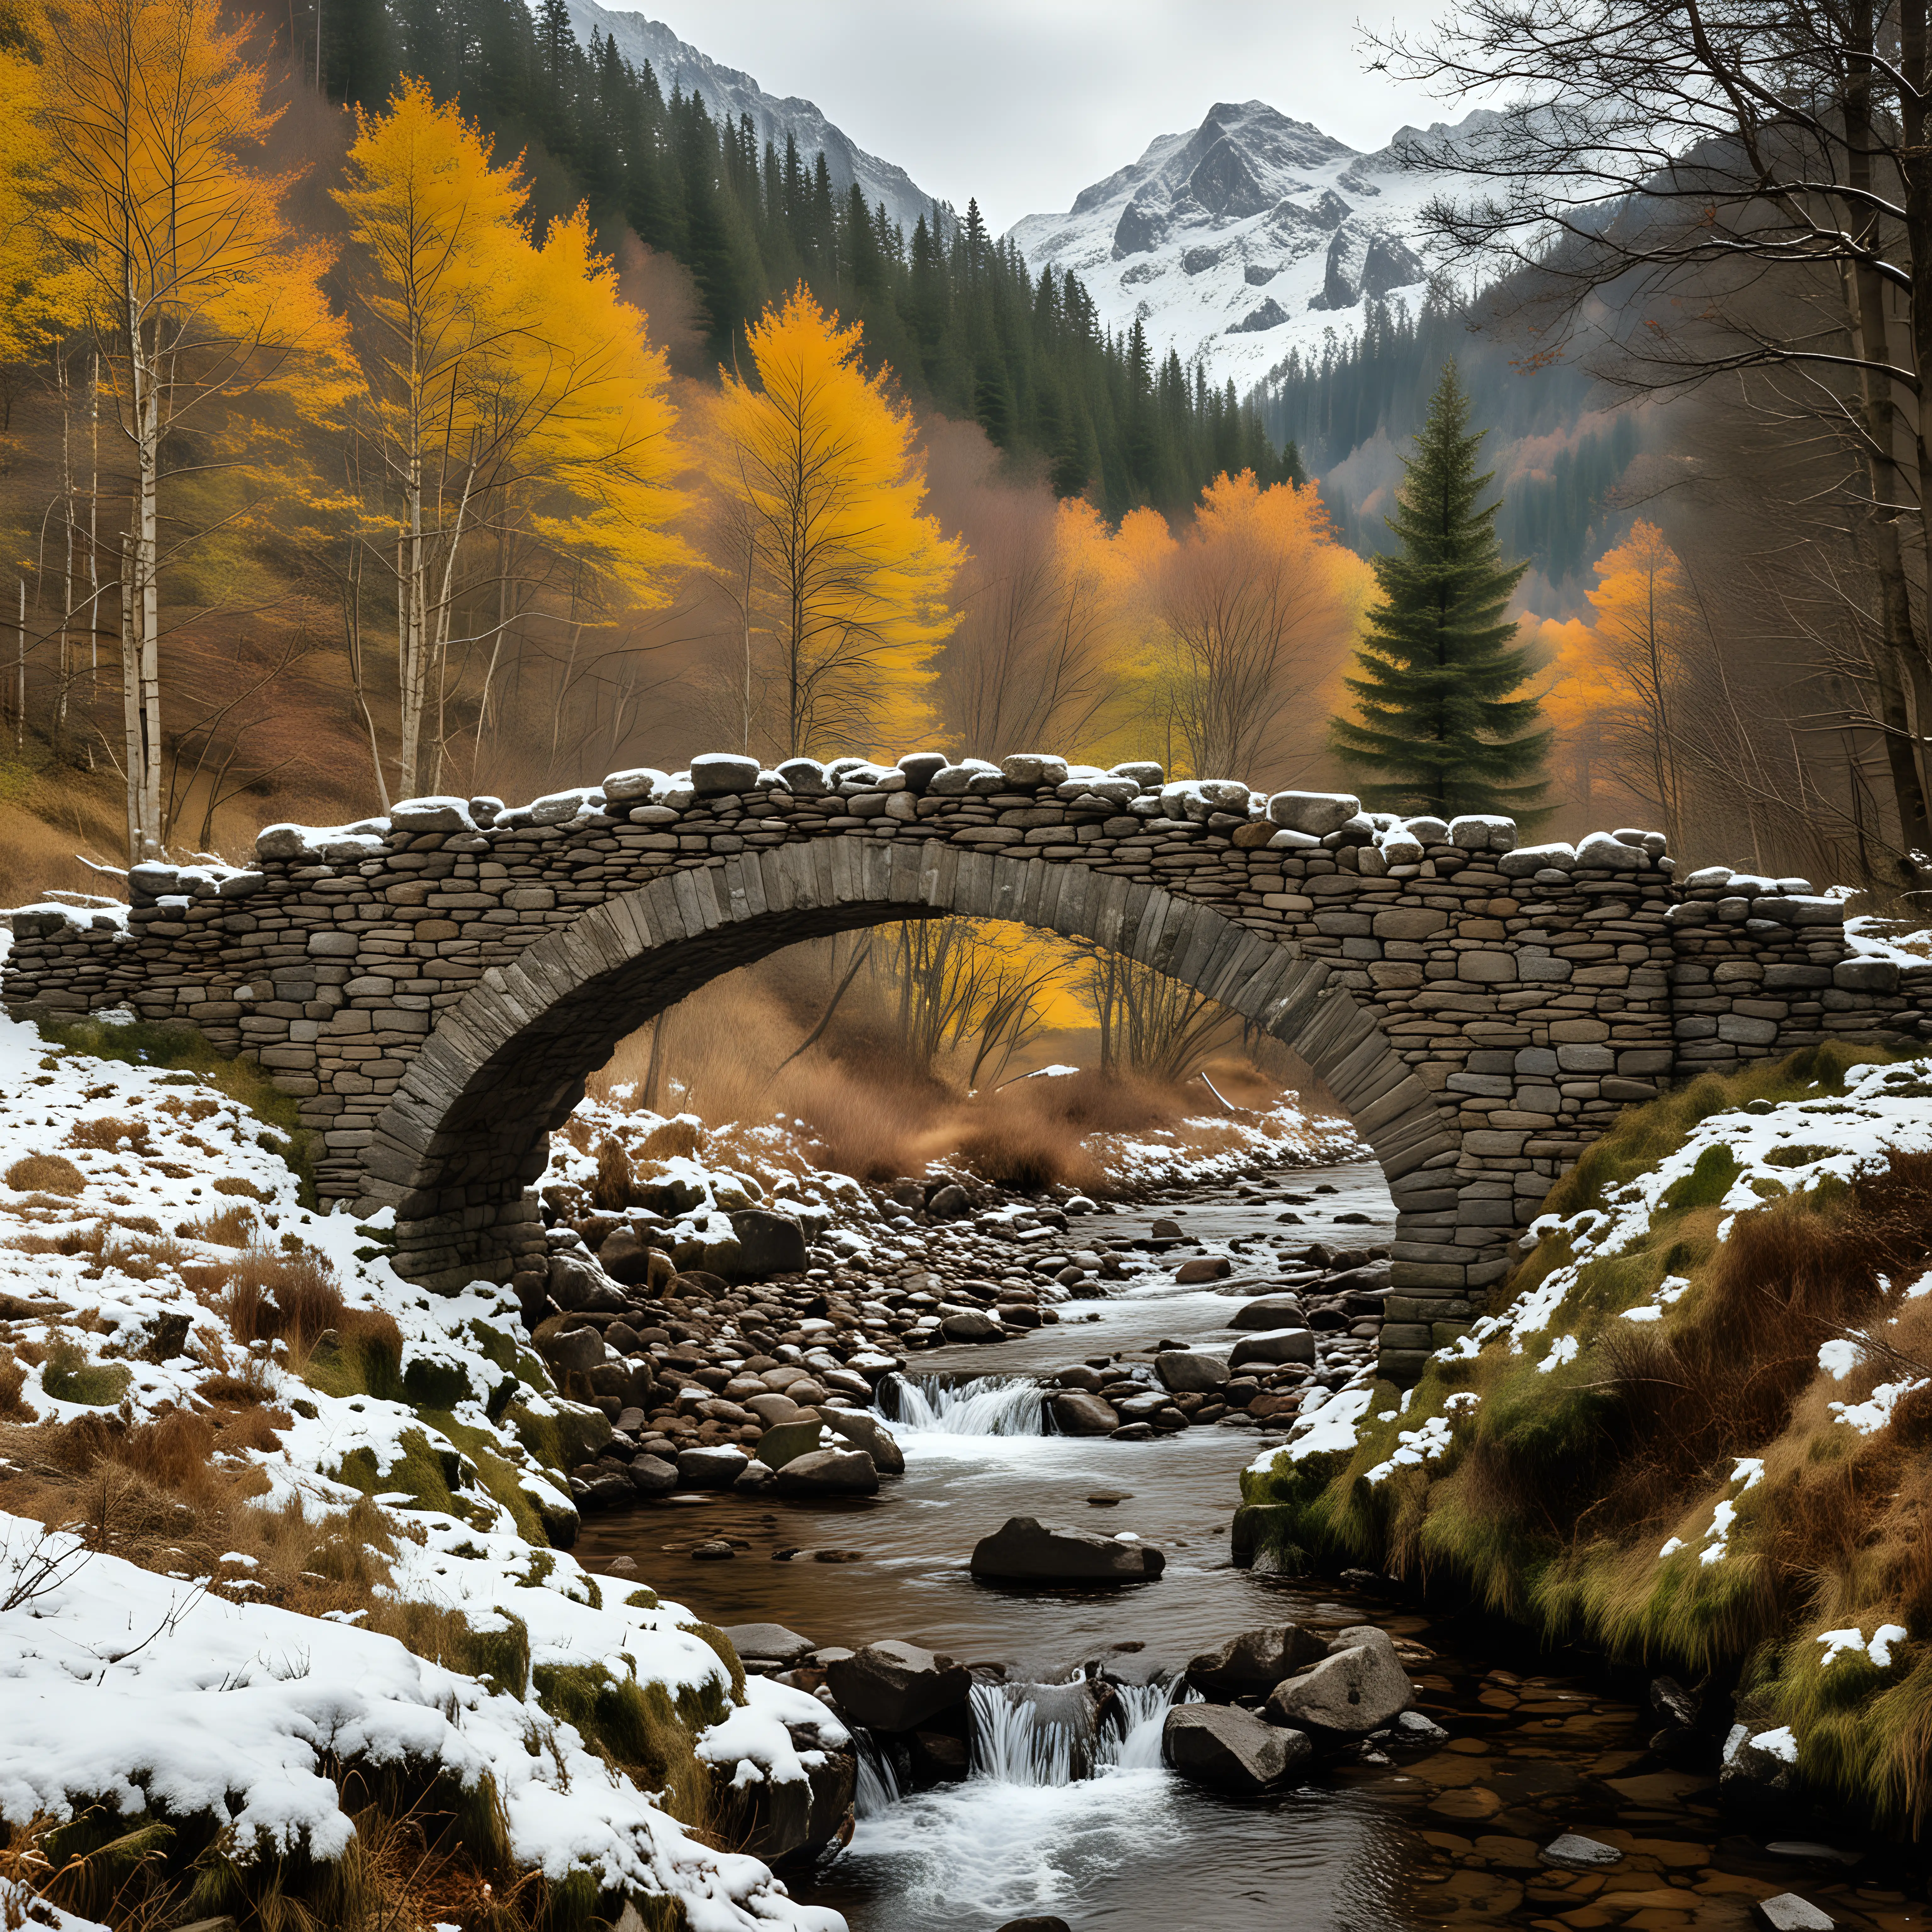 a stone arched bridge over a stream in an autumn forest with mountains in the background with snow